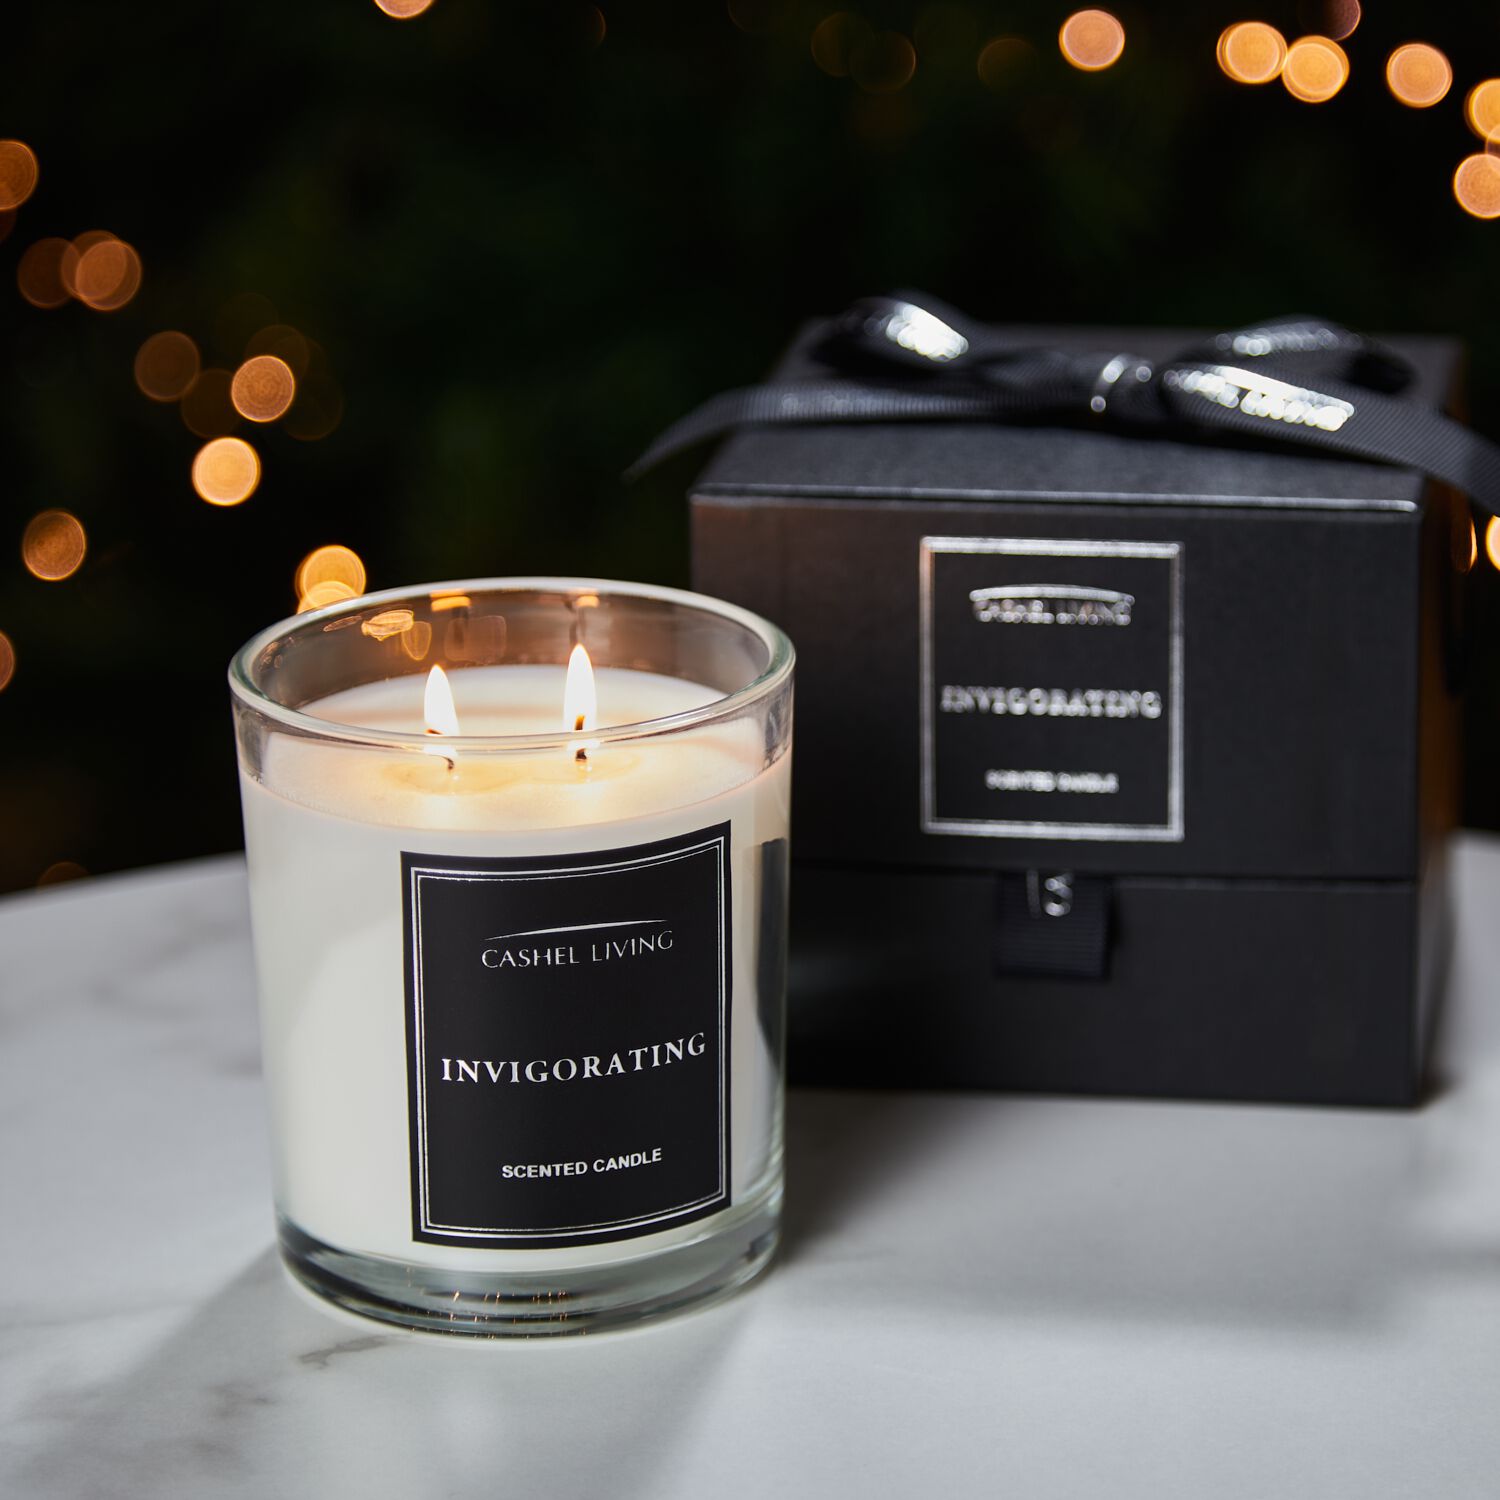 Cashel Living Invigorating Scented Candle - Home Store + More